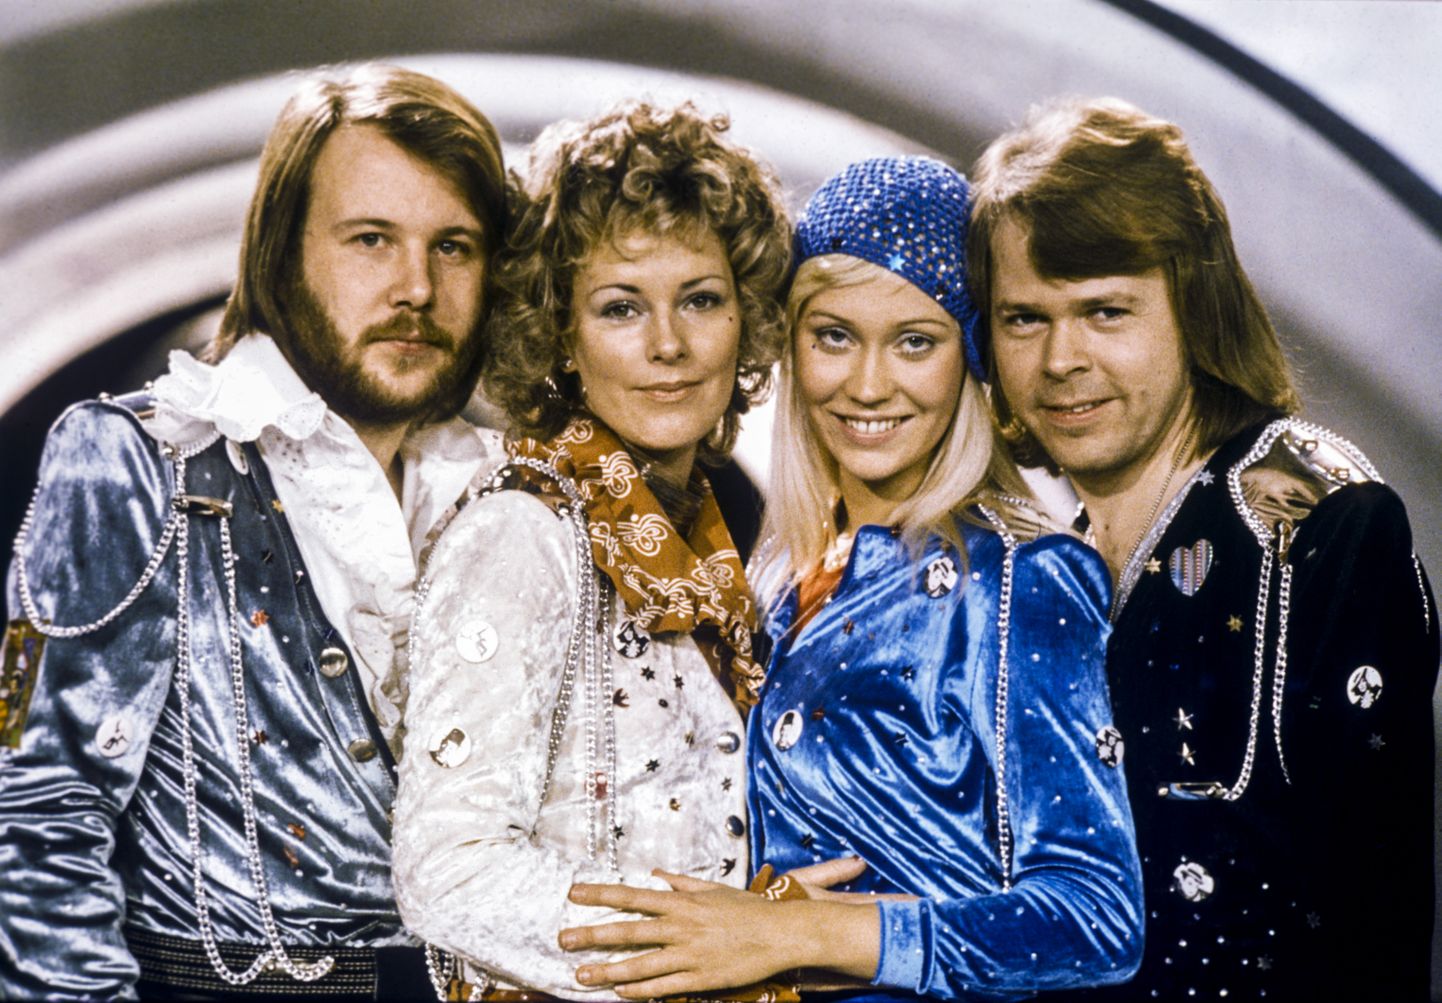 STOCKHOLM 1974-02-09
The Swedish pop group  Abba from left  Benny Andersson, Anni-Frid Lyngstad, Agnetha Faltskog and Bjorn Ulvaeus posing after winning the Swedish branch of the  Eurovision Song Contest with their song "Waterloo" 
Foto: Olle Lindeborg / TT / Kod: 190